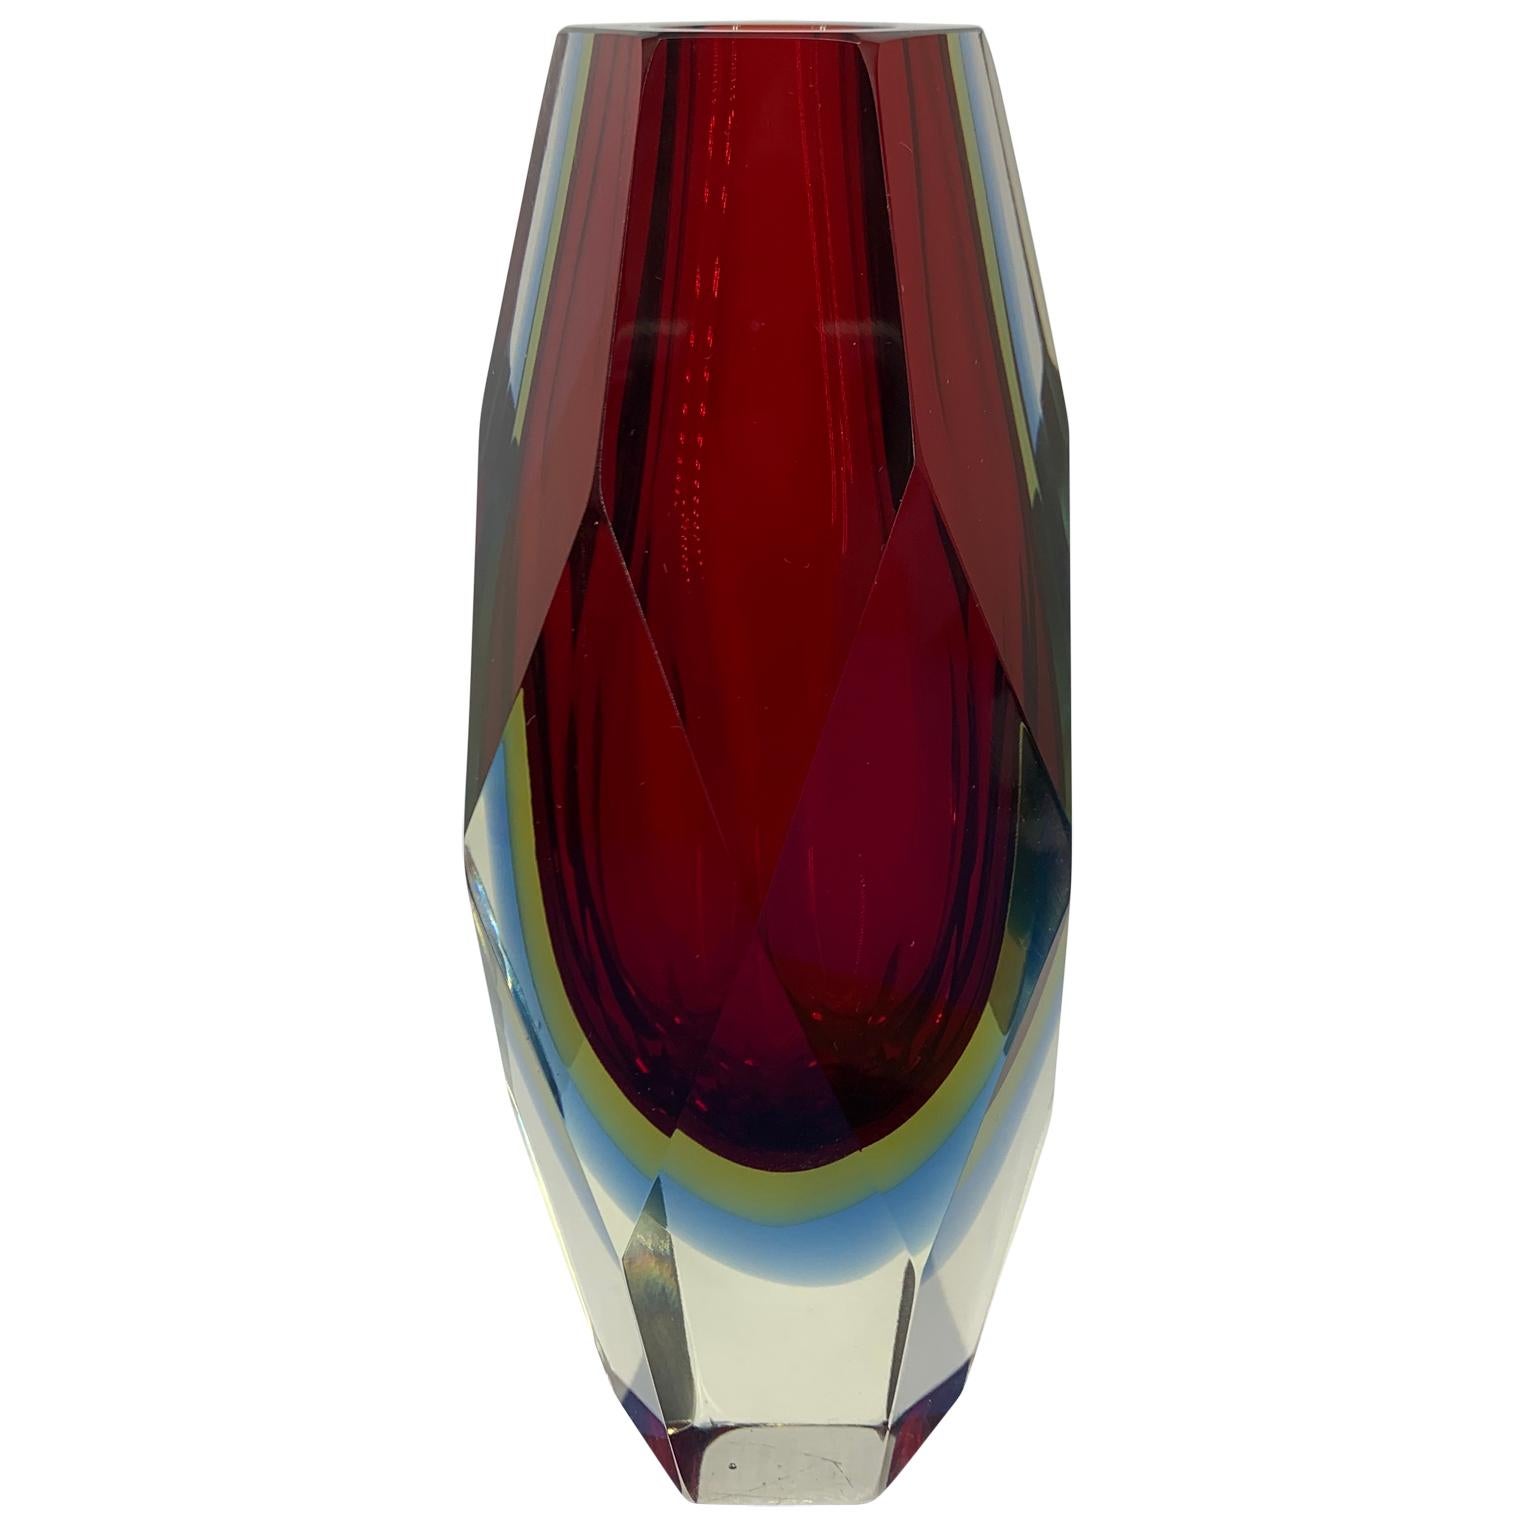 Italian Mid-Century Modern Red, Blue and Yellow Faceted Sommerso Murano Glass Vase